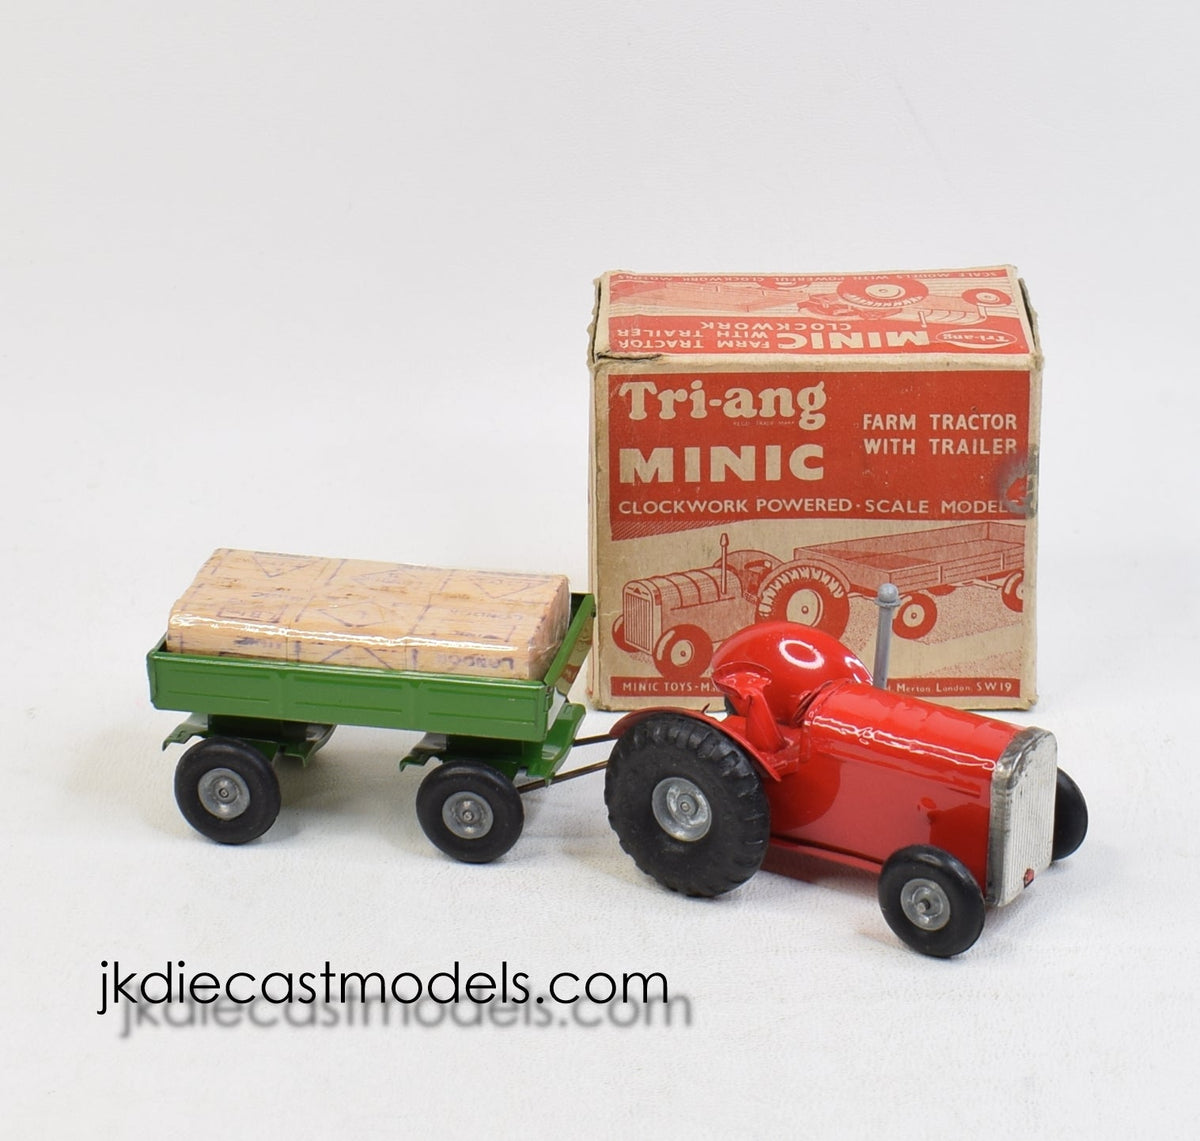 Tri-ang Minic Farm Tractor with trailer Very Near Mint/Boxed